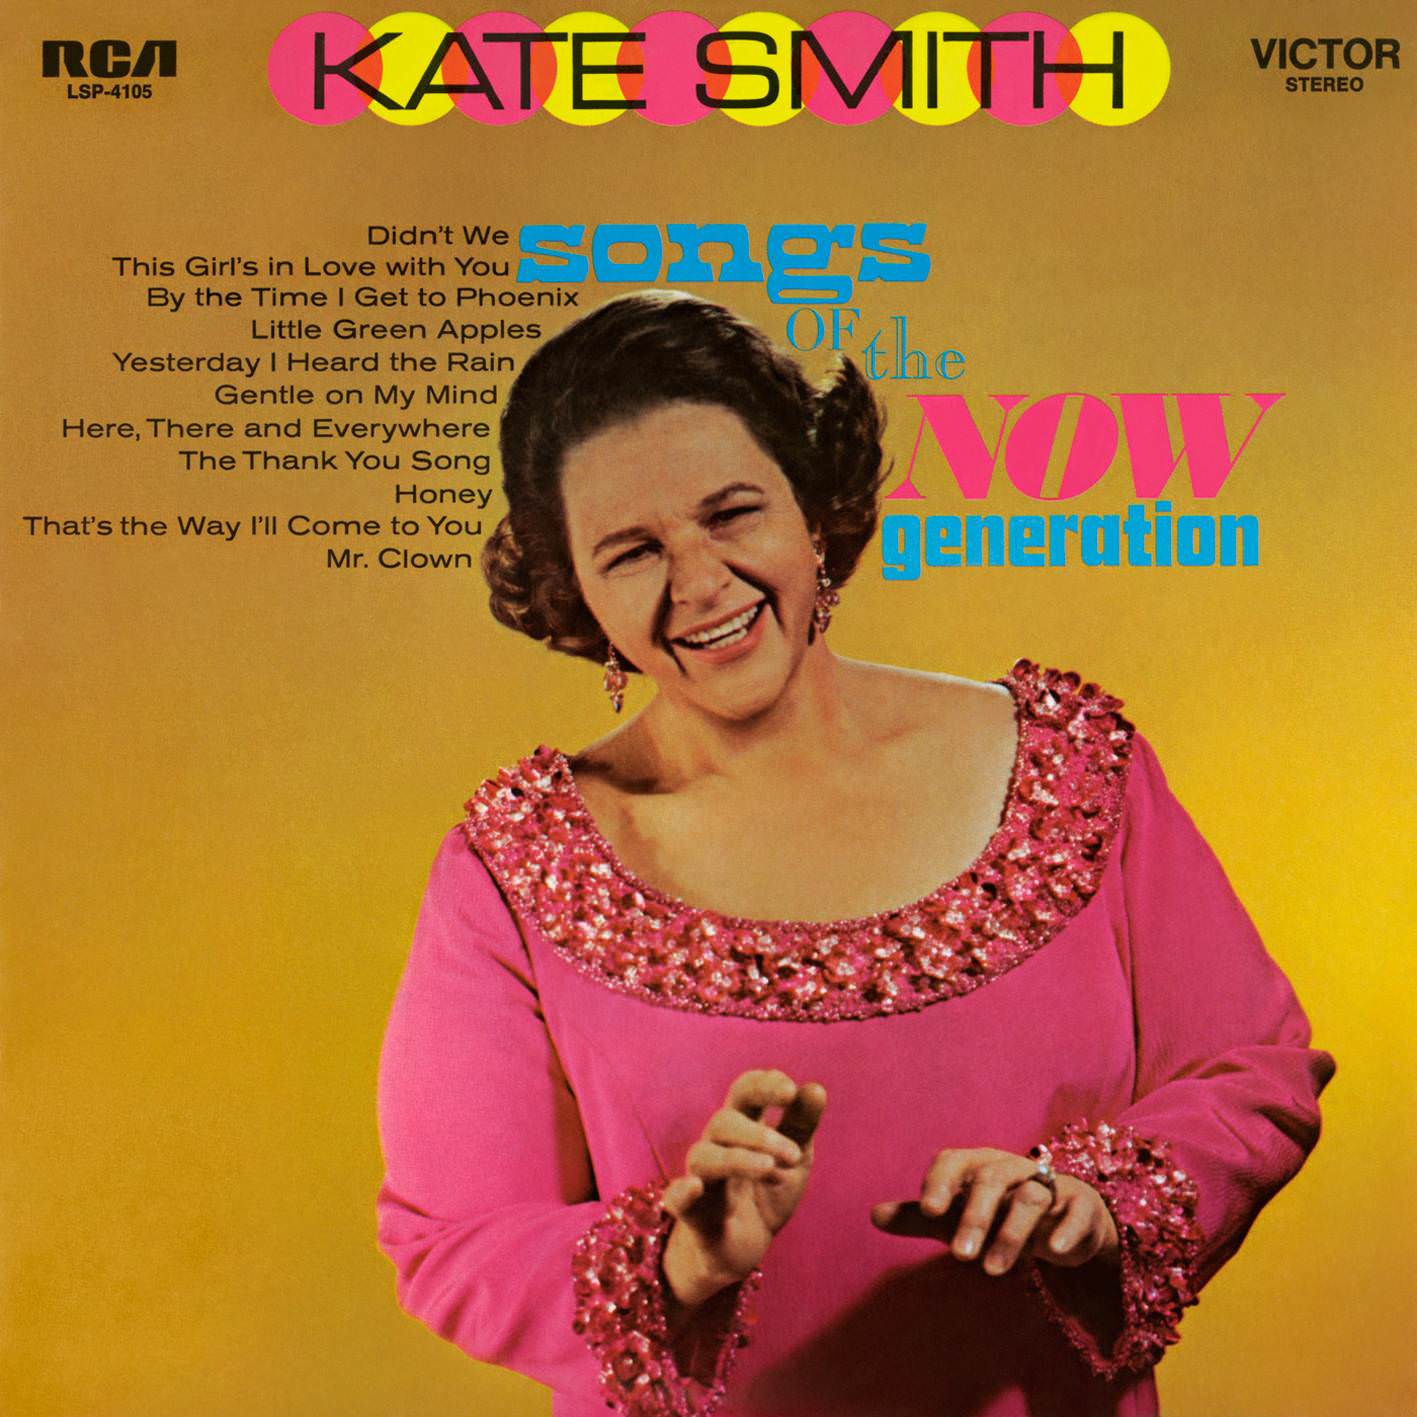 Kate Smith – Songs Of The Now Generation (1969/2018) [AcousticSounds FLAC 24bit/192kHz]